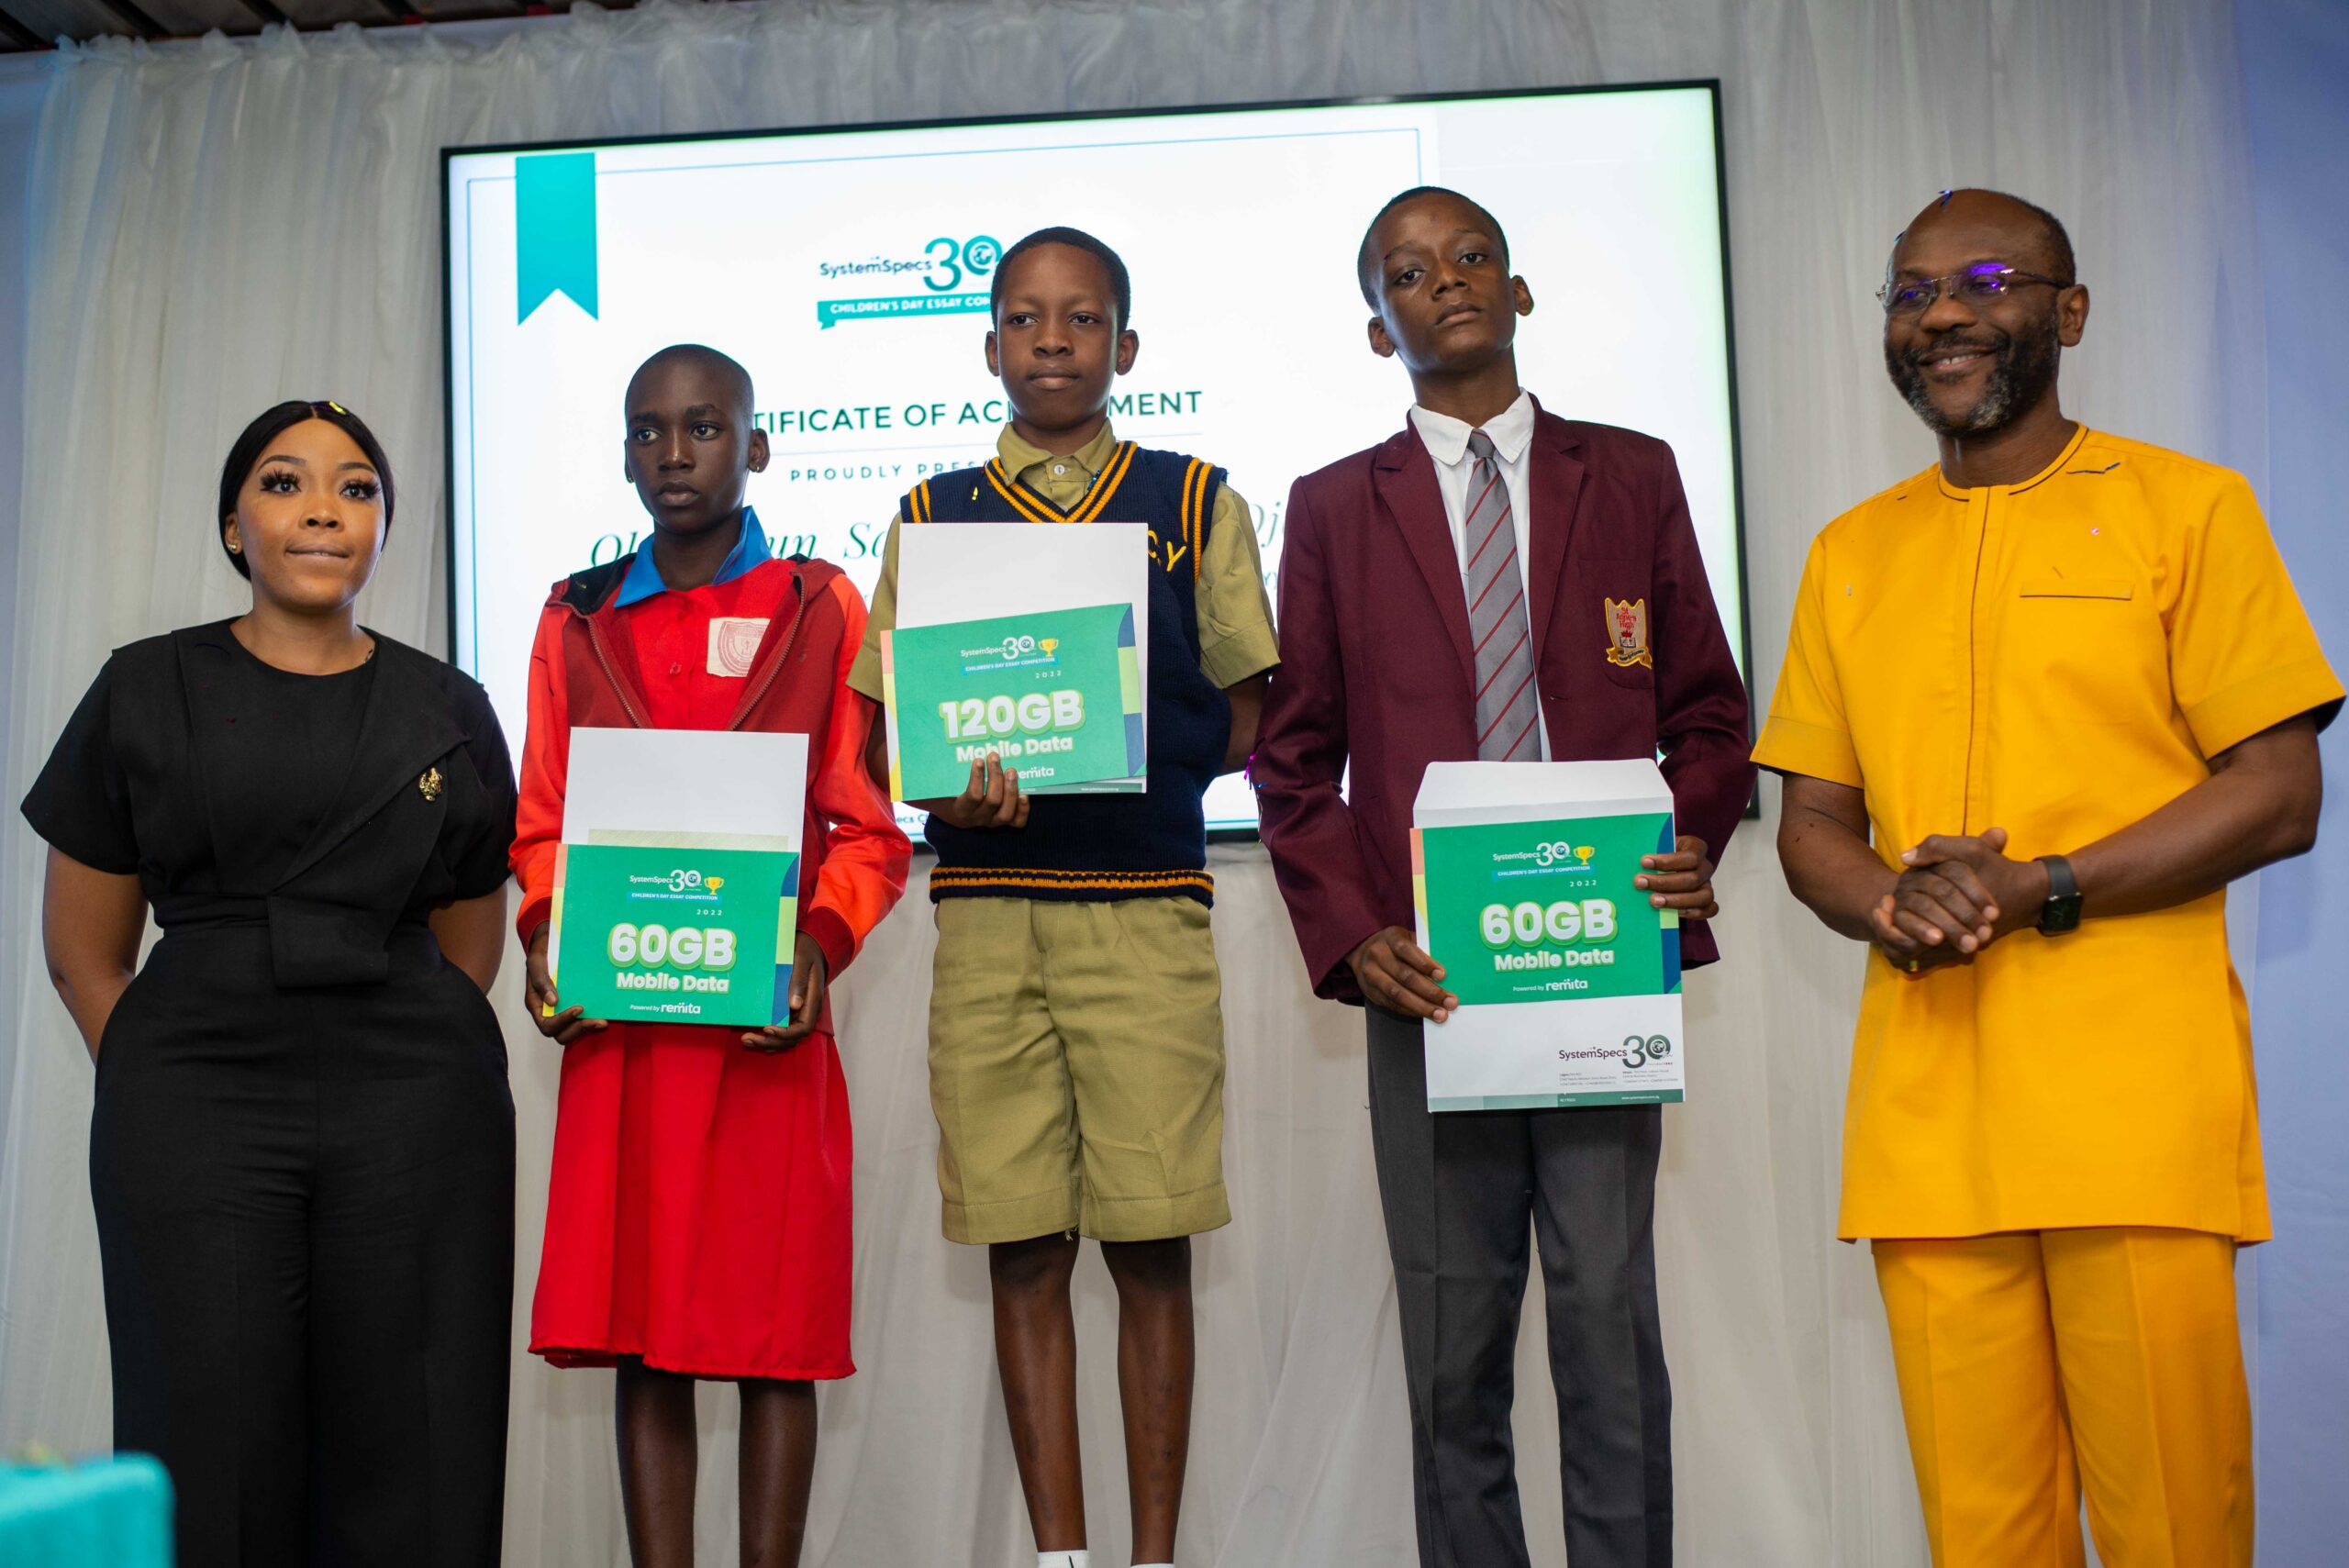 systemspecs essay competition winners